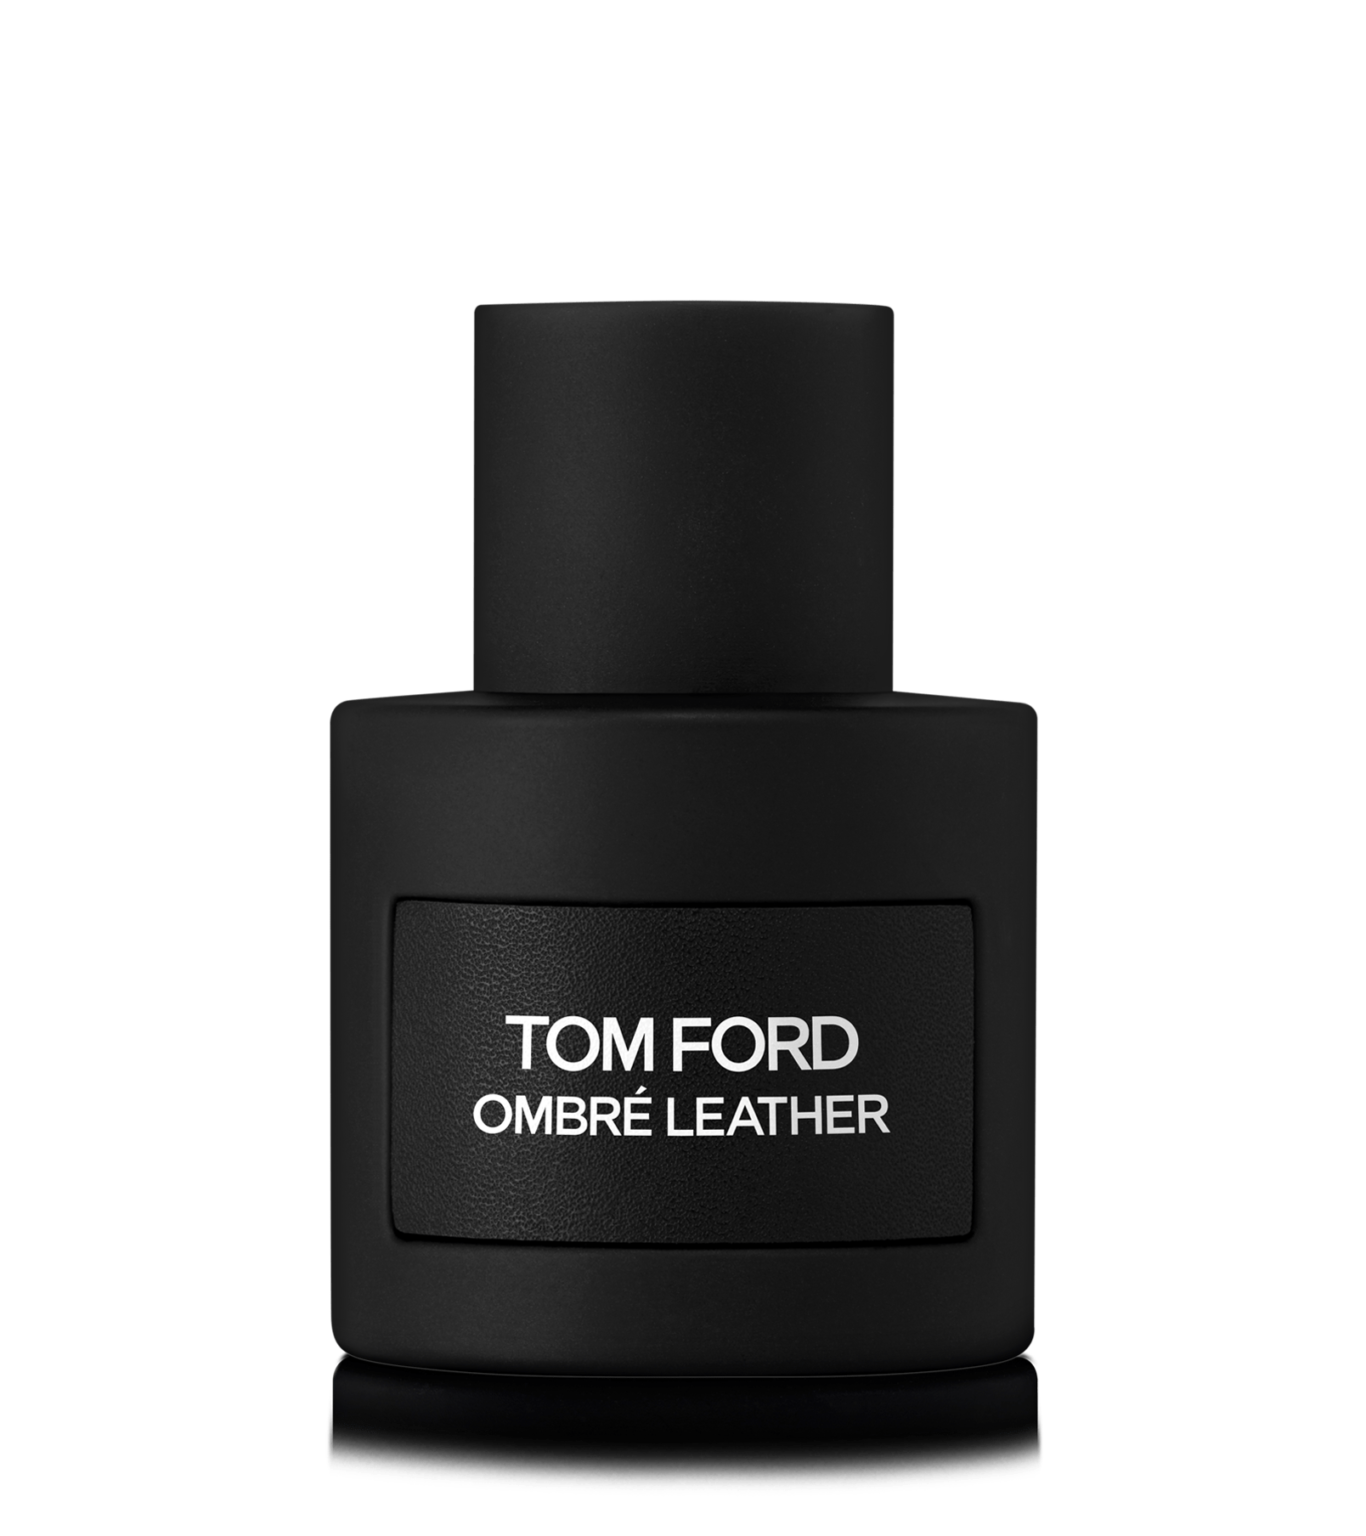 ombre-leather-16-tom-ford-a-fragrance-2016